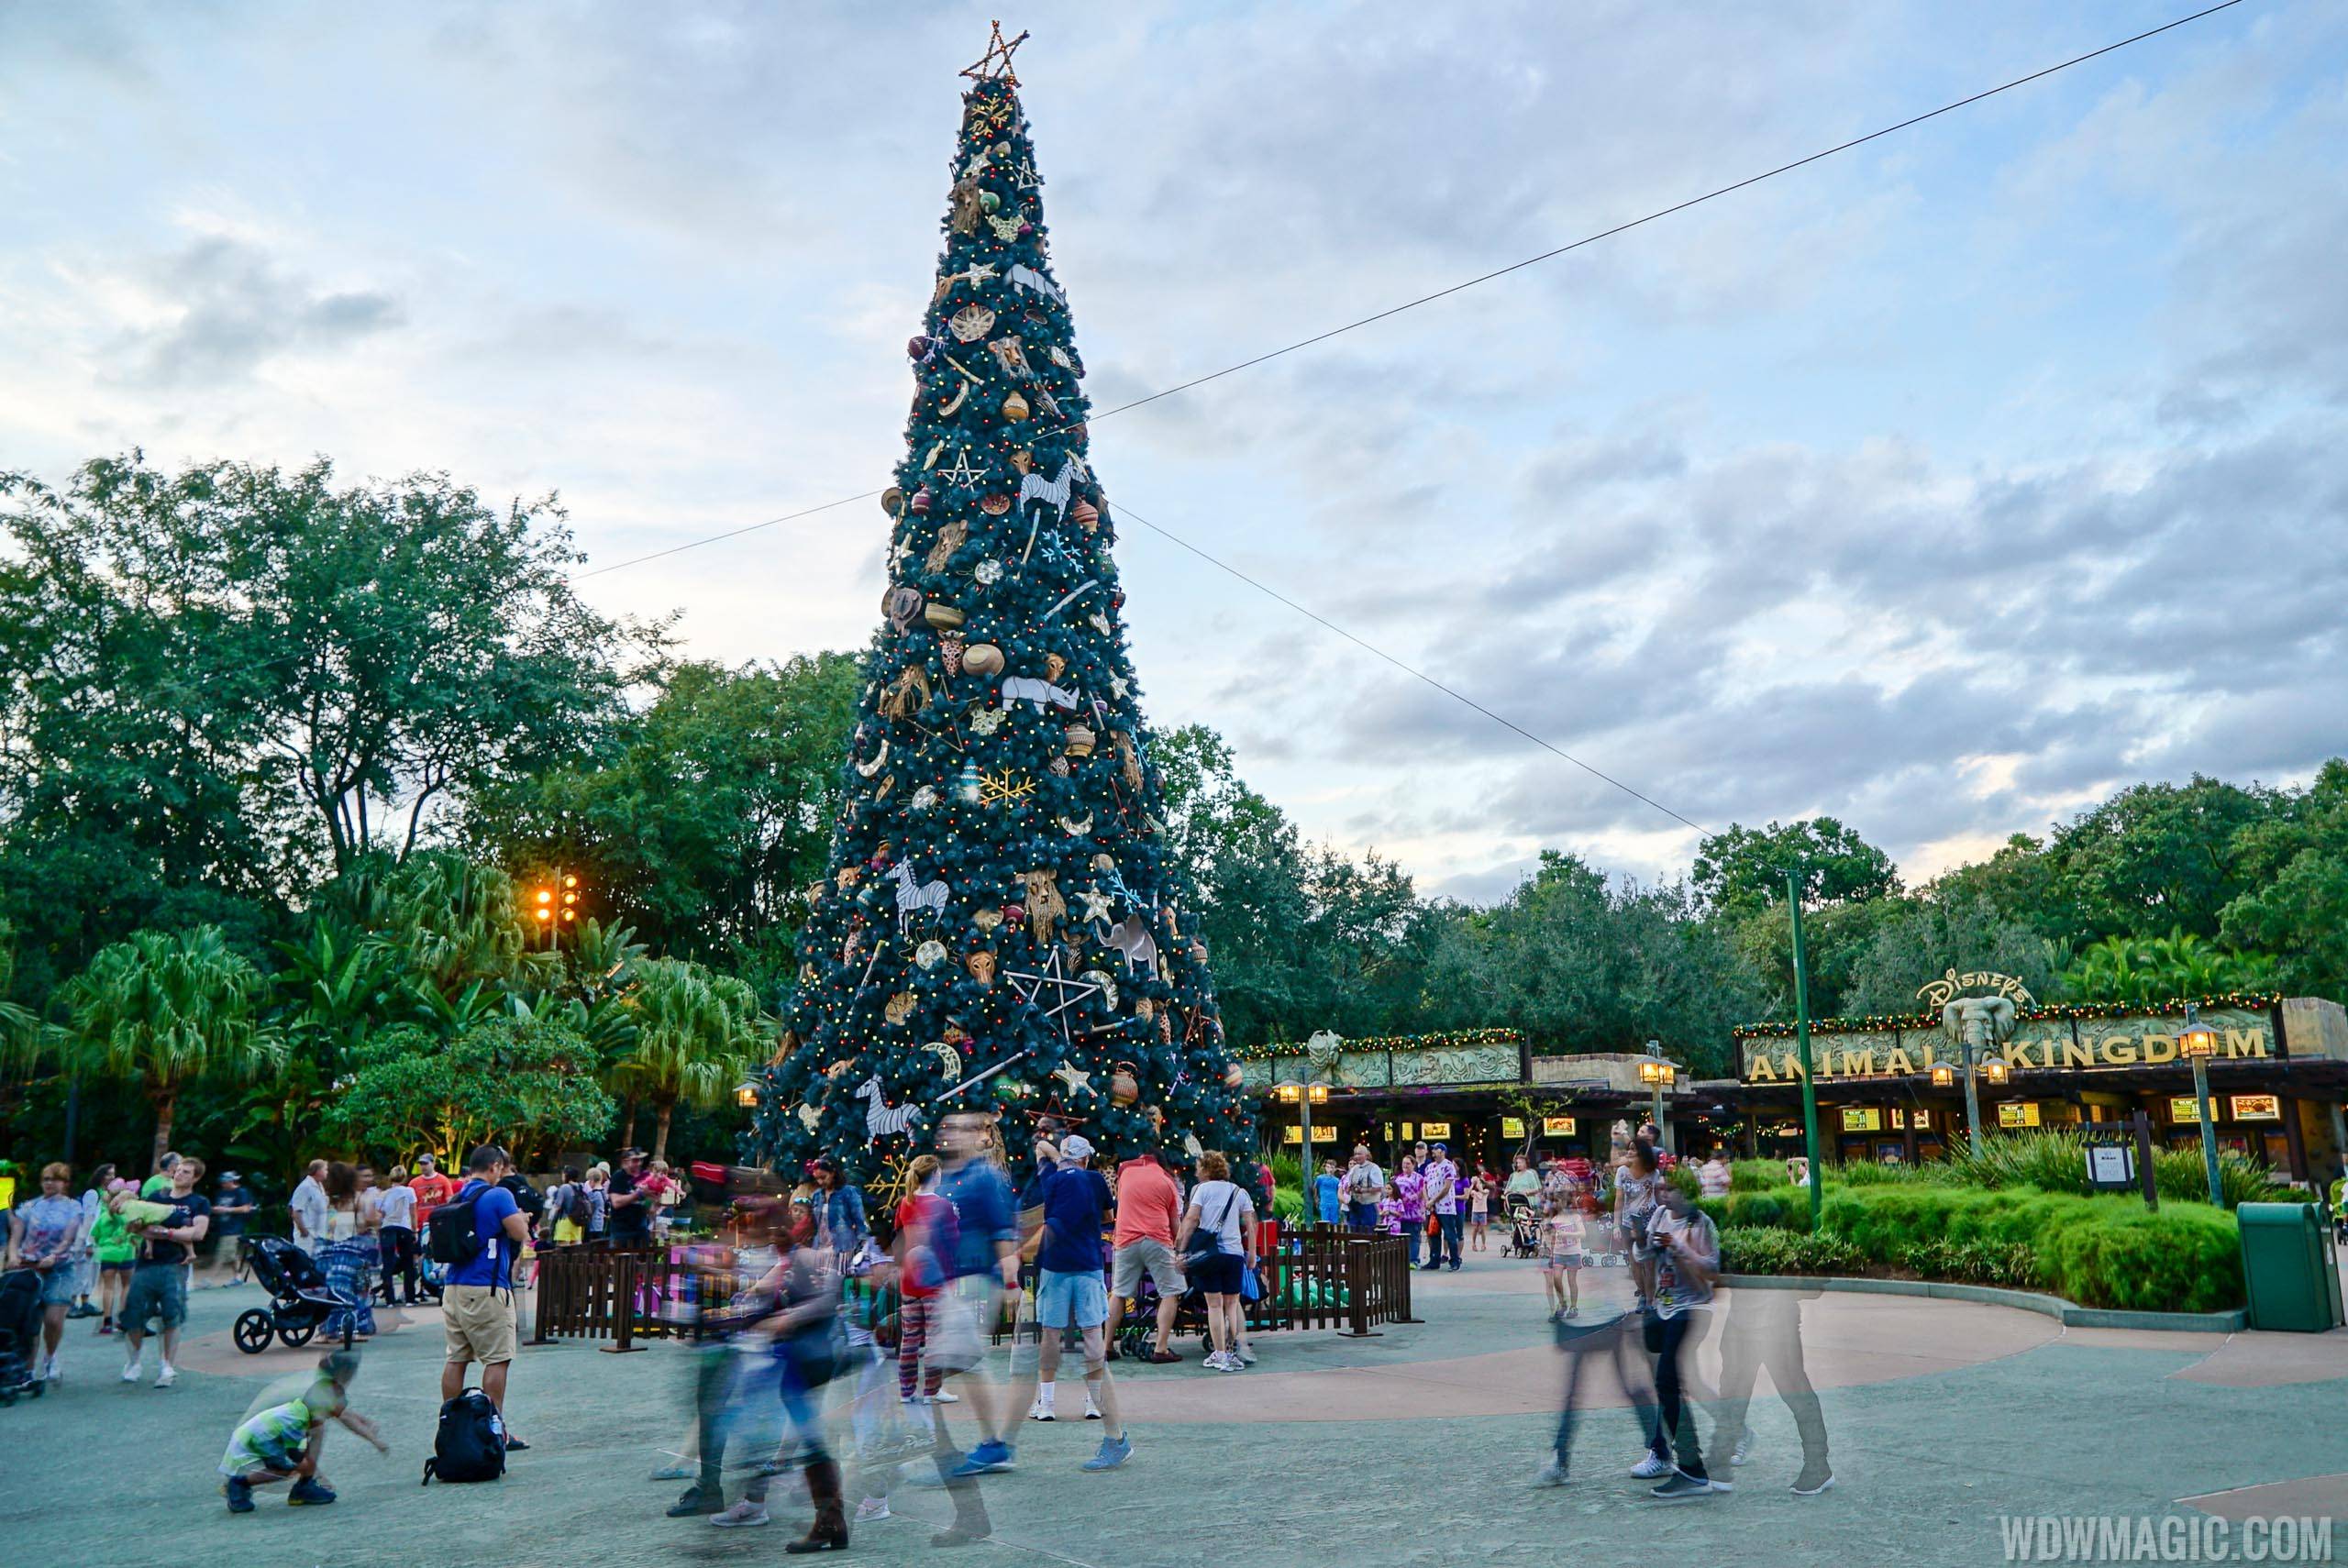 Holiday-themed meet and greets get underway at Disney's Animal Kingdom